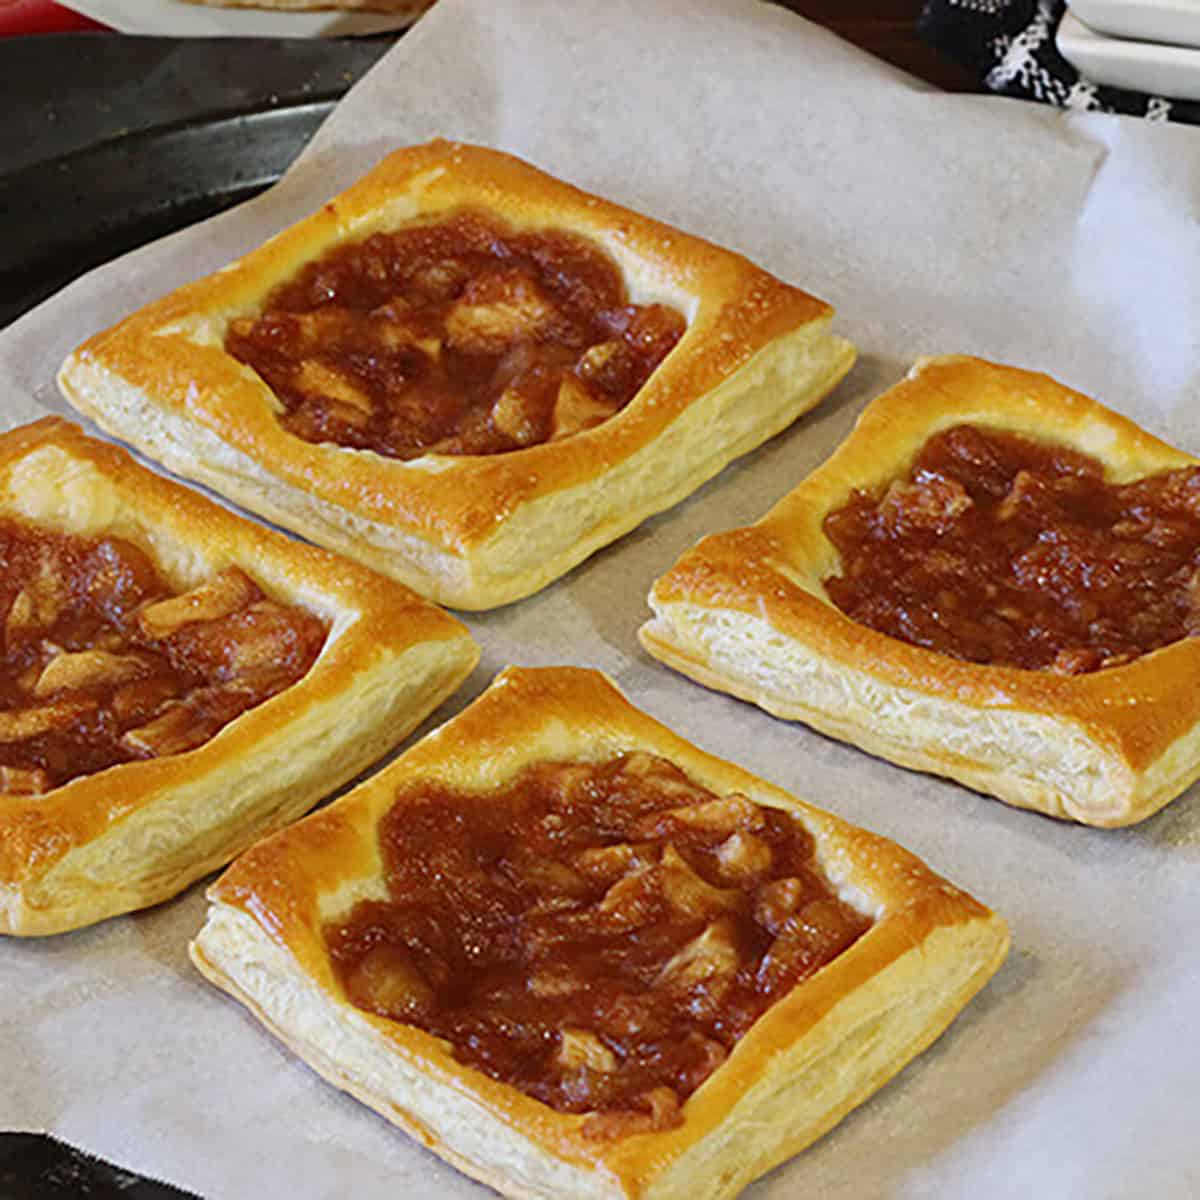 Place the pastry squares on baking sheet and bake. 